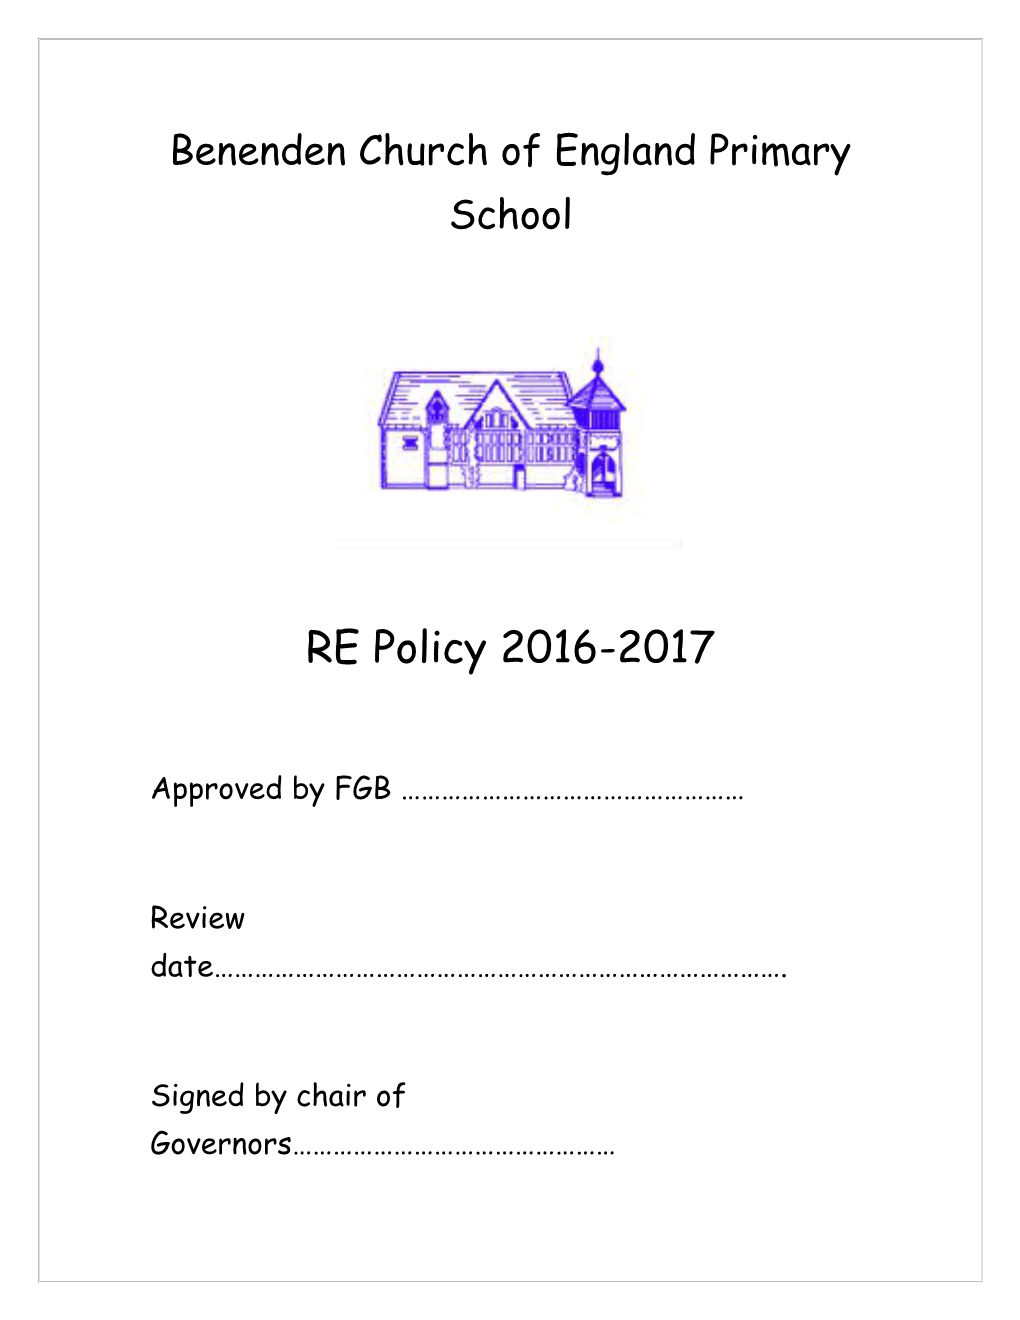 RE Policy for Church of England Sponsored Academies